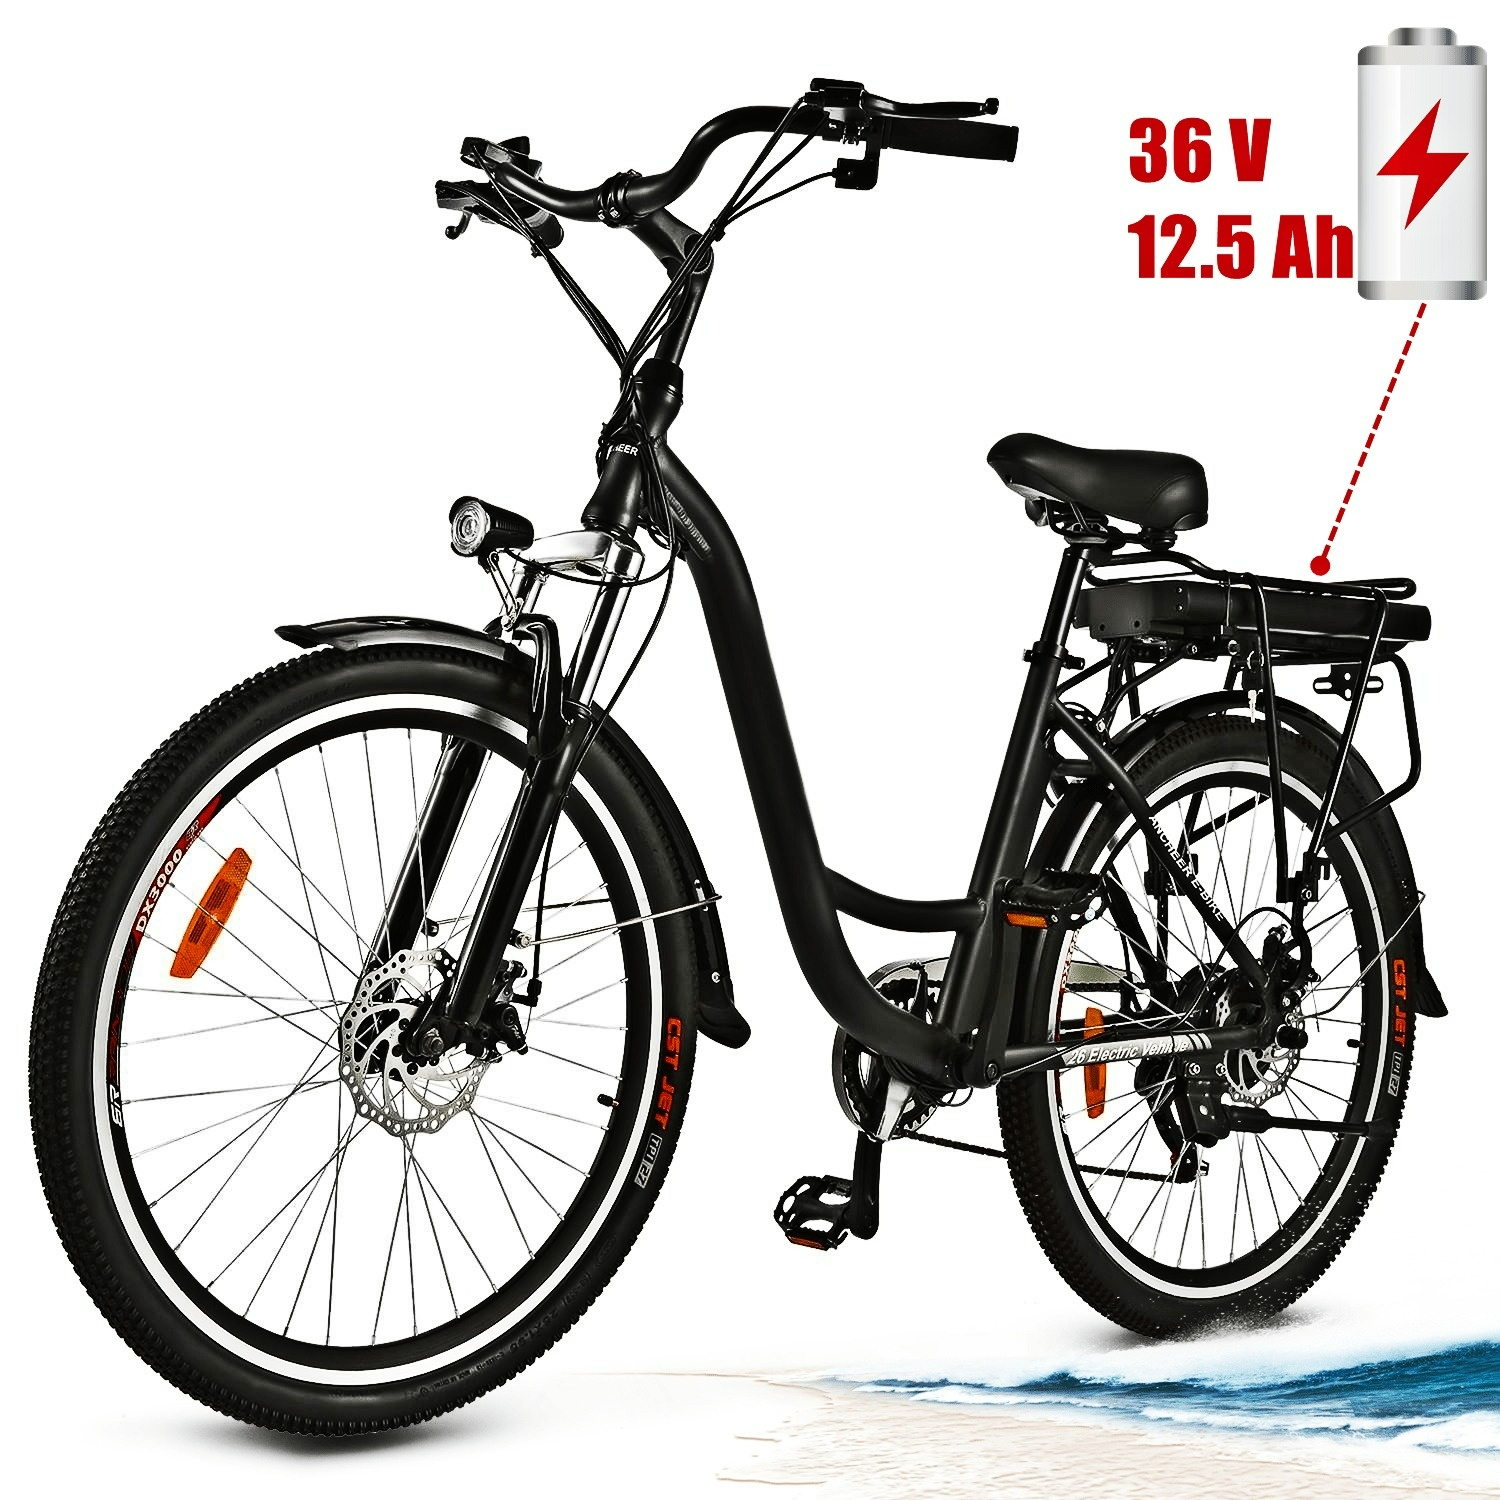 26" Aluminum Electric Bike, Adults Electric Commuting Bicycle with Removable 12.5Ah Battery, Professional Derailleur with 6 Speed City Ebike for Women Men